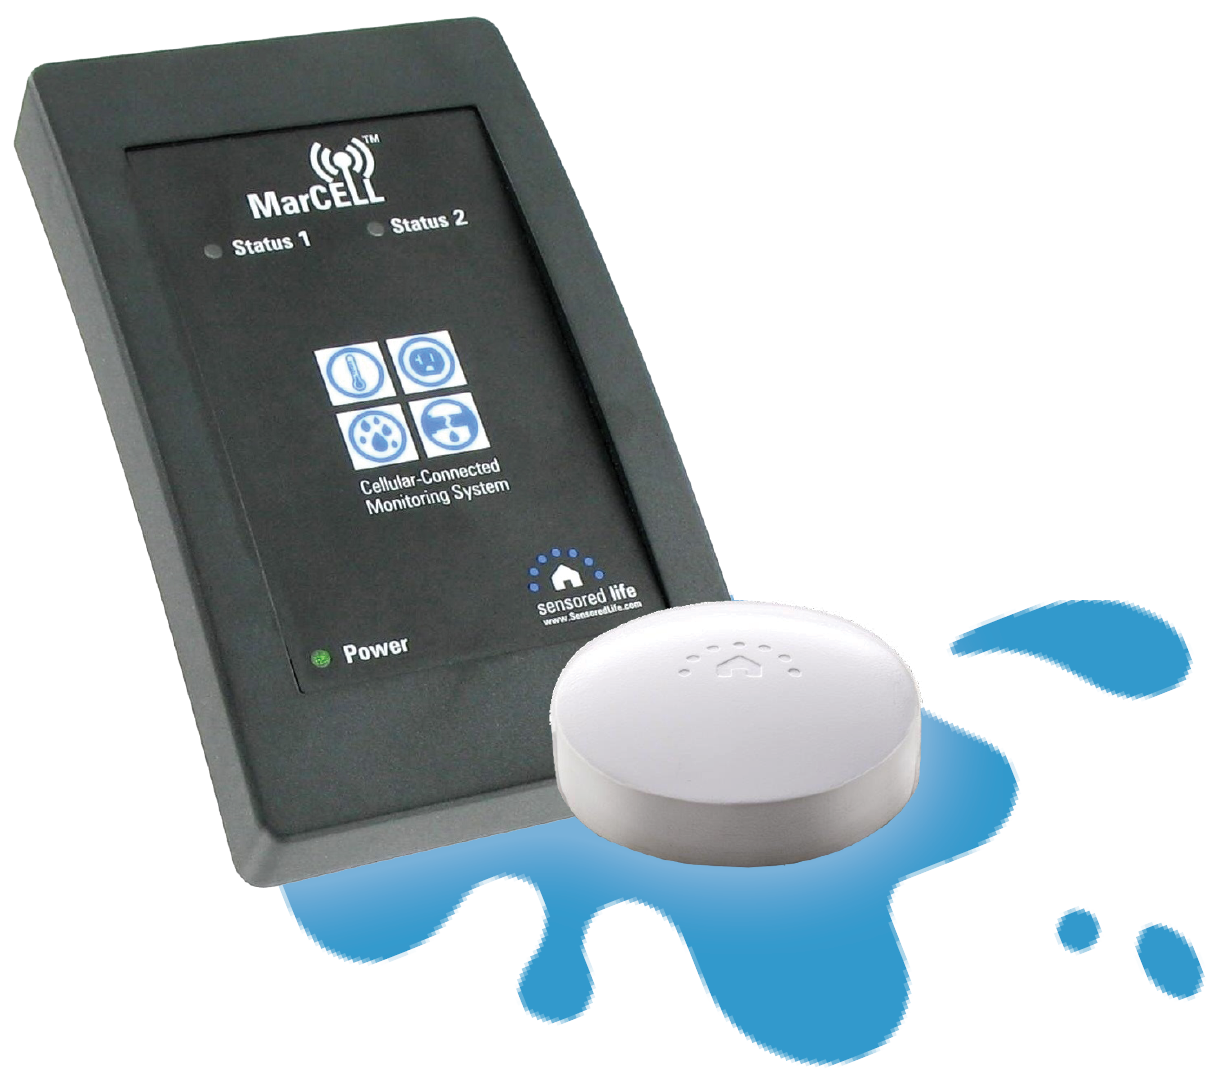 Marcell - Temperature, Humidity & Power Monitor - 4G Cellular Connected Multisensor